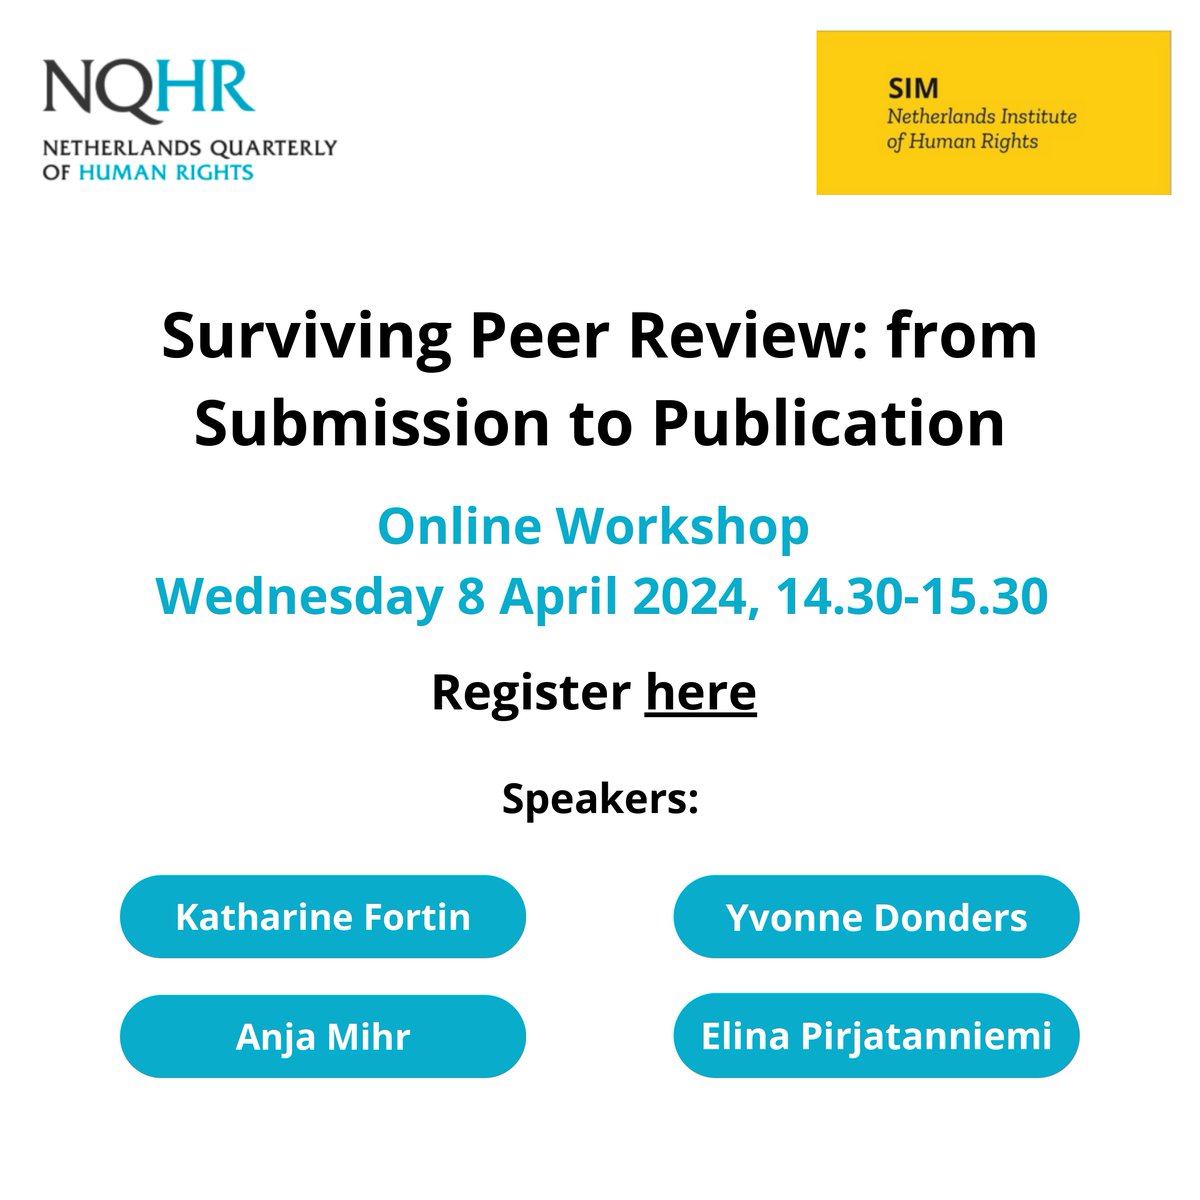 The NQHR is organising an online peer review workshop for early career researchers on 8 April titled Surviving Peer Review: from Submission to Publication! Register by filling in the online form: forms.uu.nl/universiteitut…